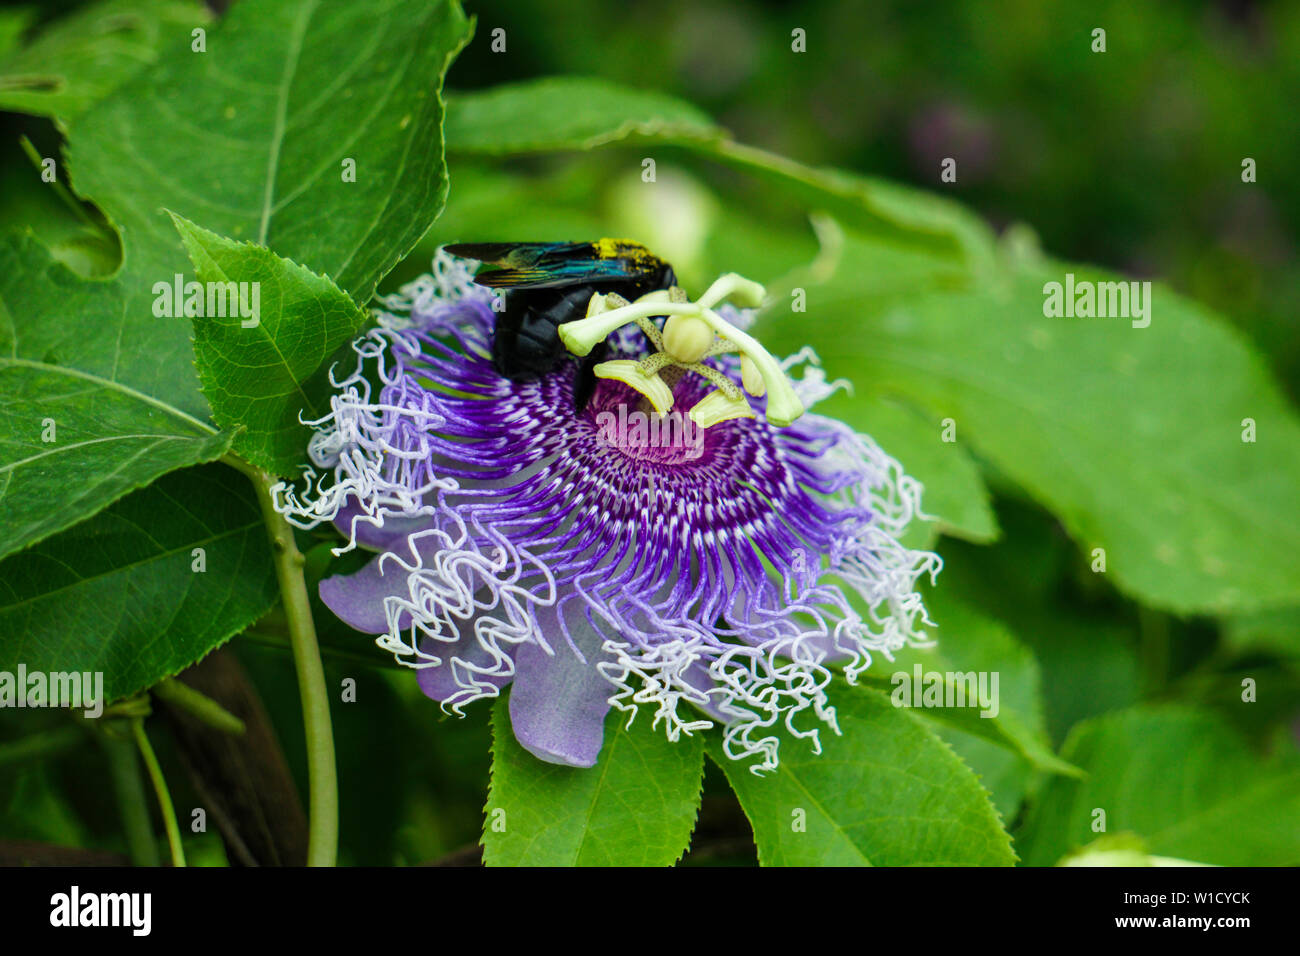 Isolated HD Image Decorative Beautiful Colorful Flower in the garden Stock Photo